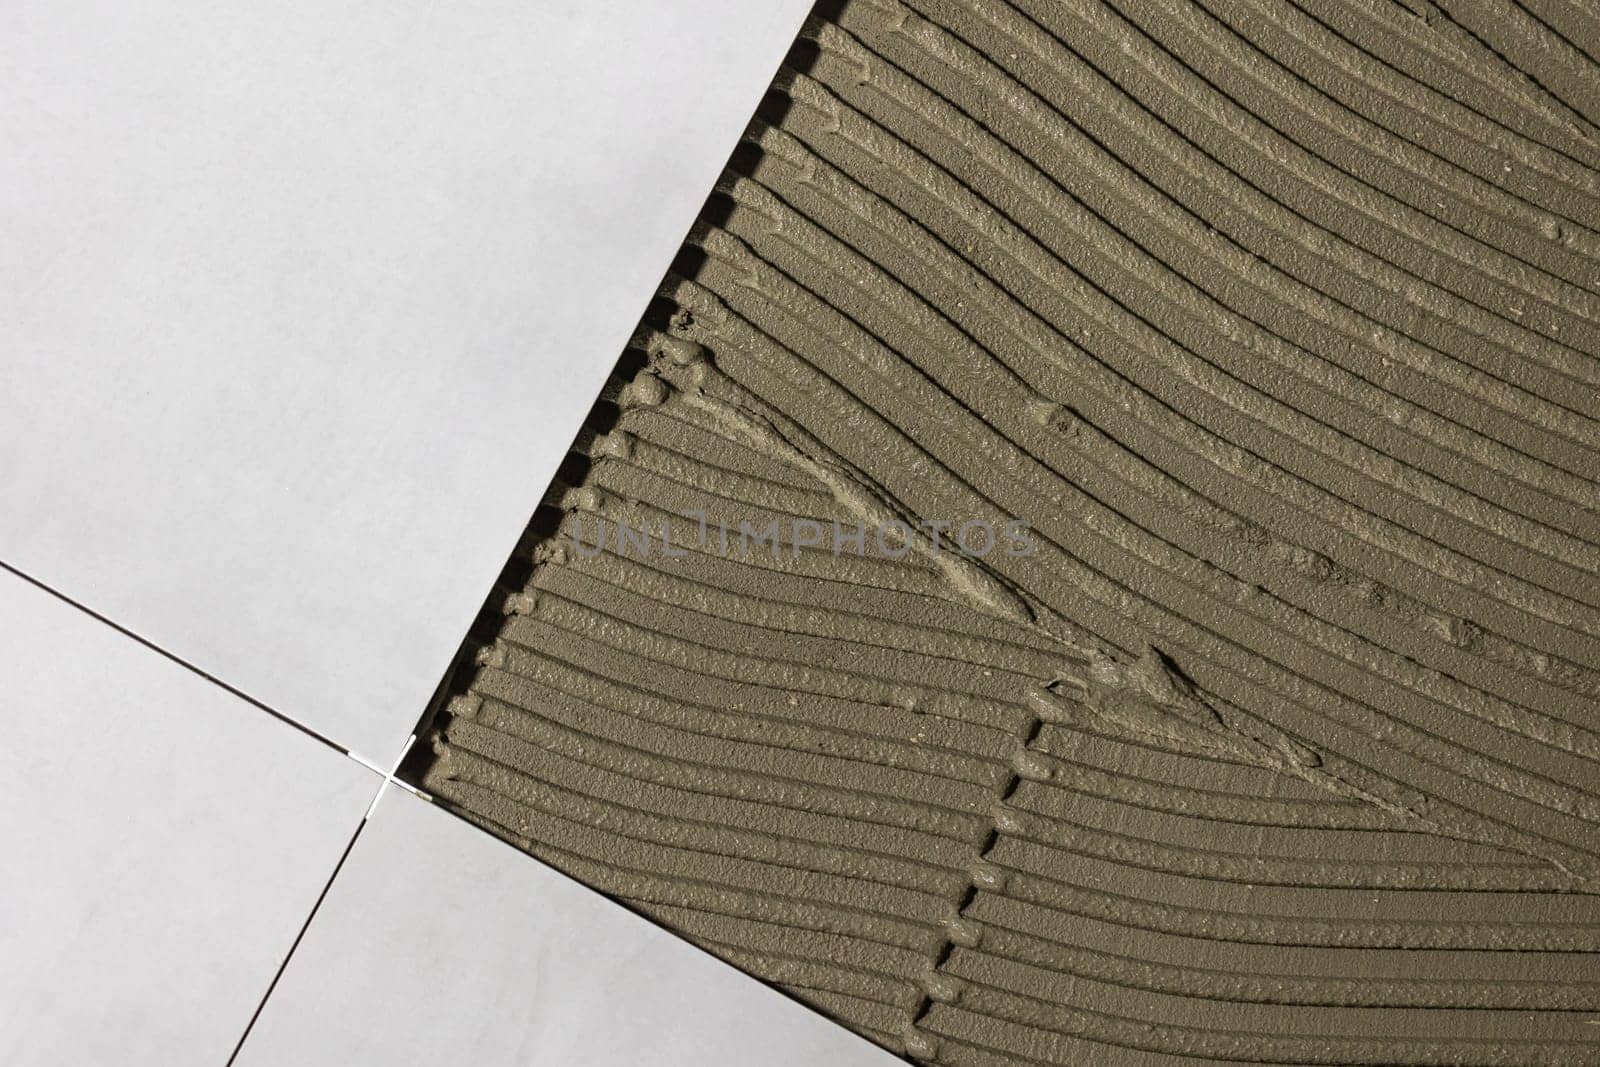 Detail of clips or spacers in the lash tile leveling system, renovation or reconstruction concept by Kadula